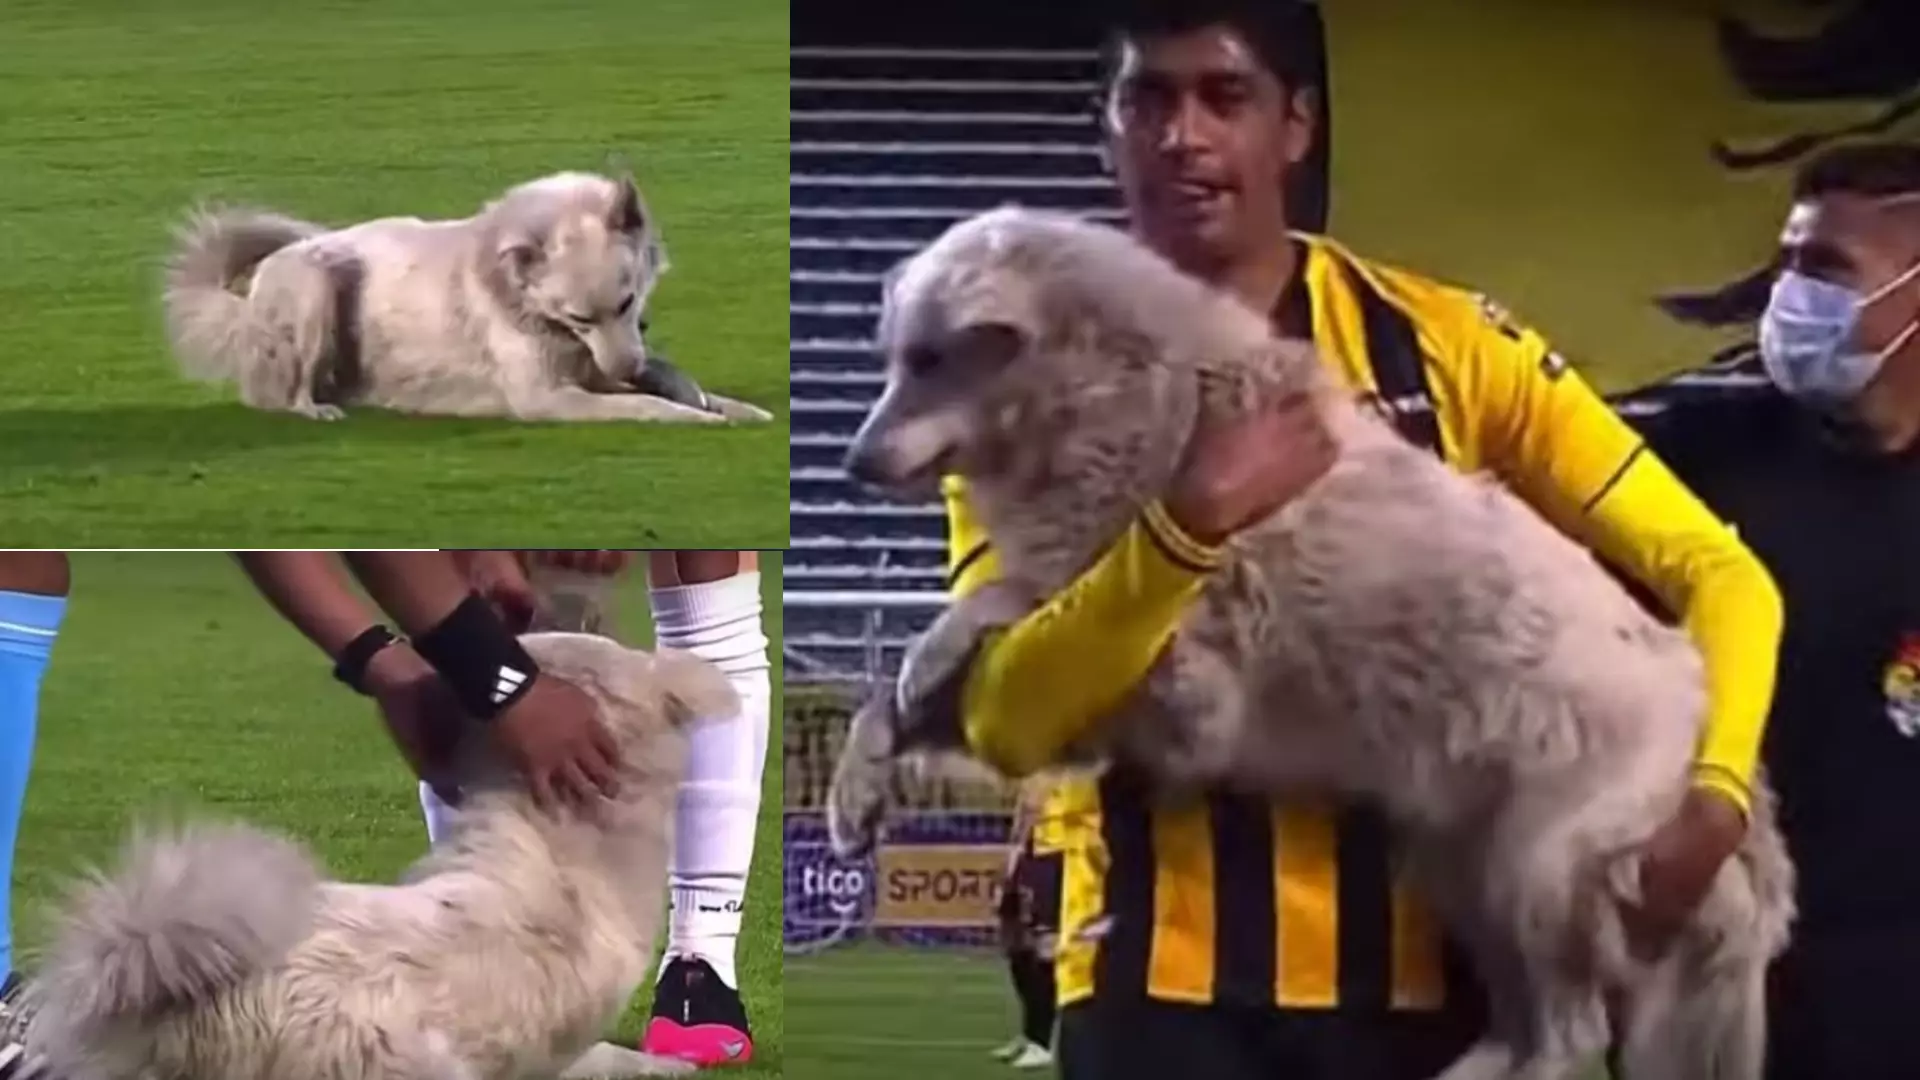 The Moment A Dog Invades Football Pitch And Steals Boot